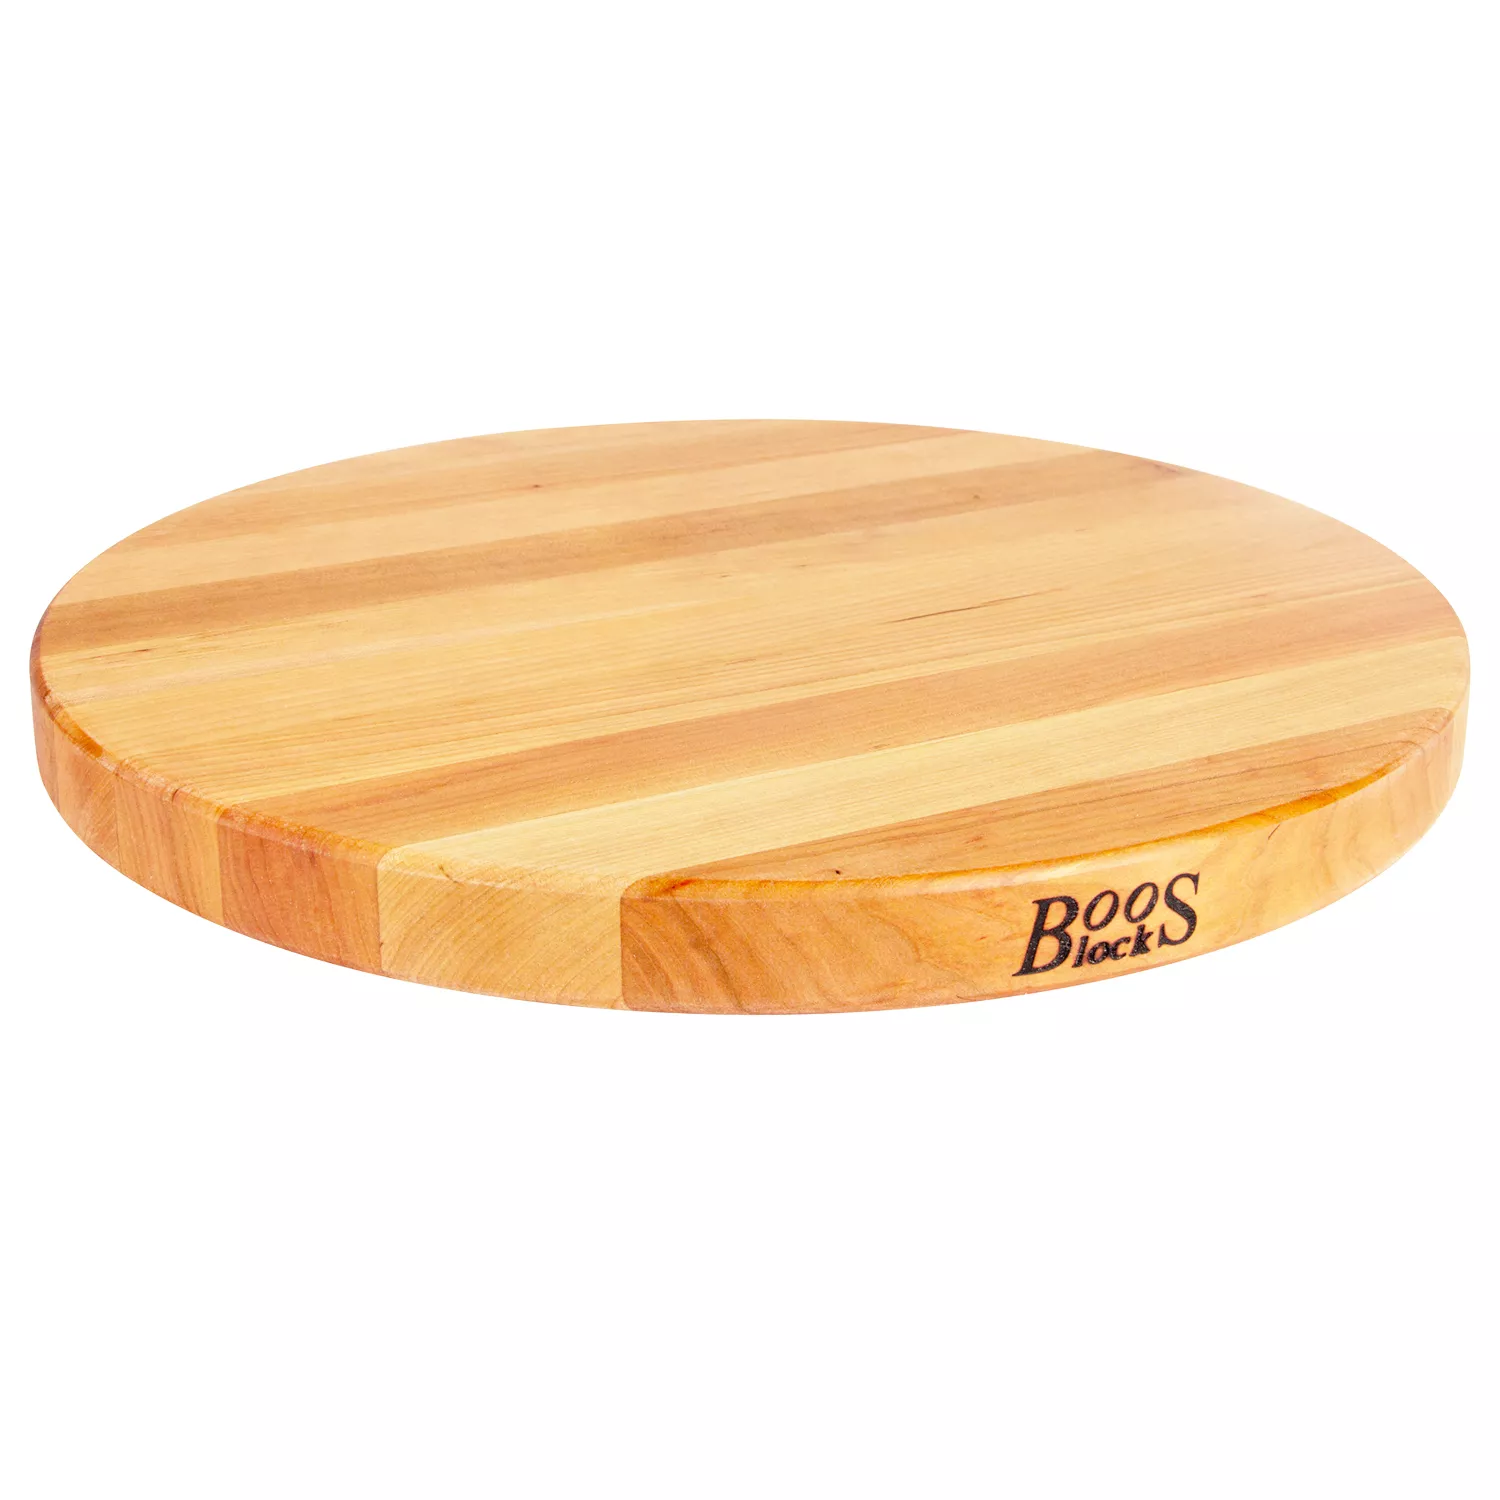 Maple Round Chopping Block with Metal Handles 3 Thick (Handle Boards)